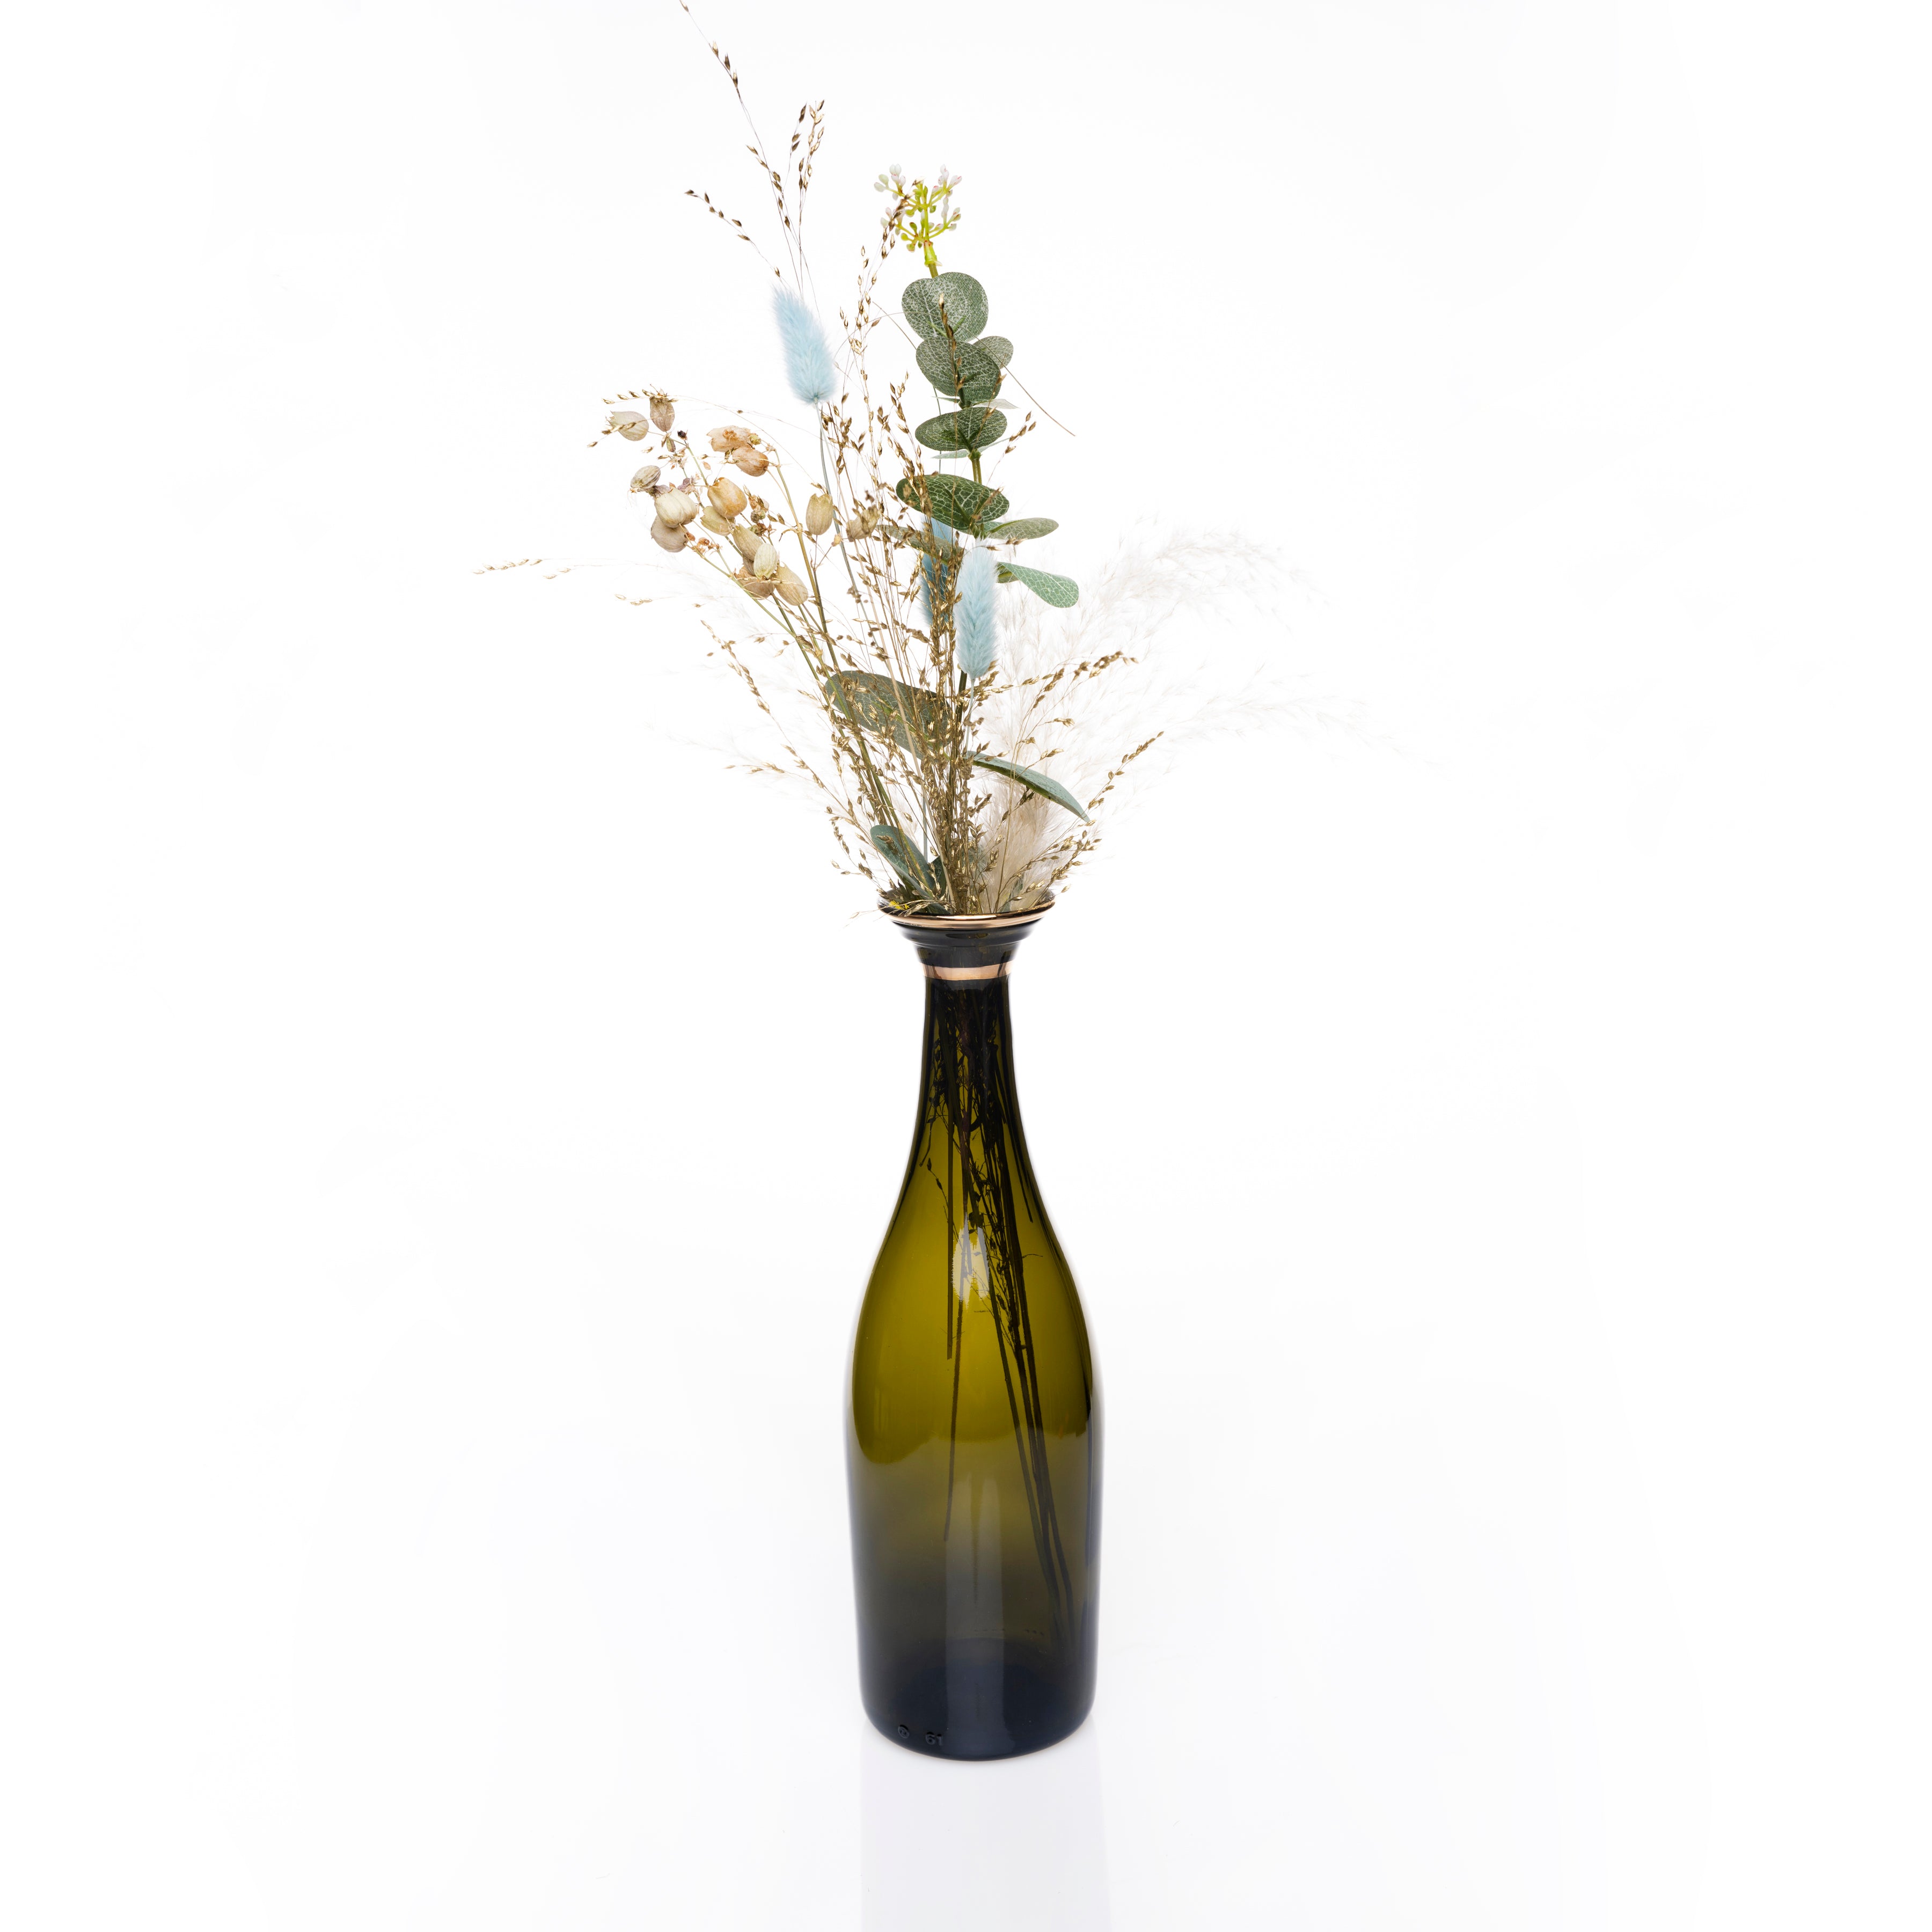 Vase aus Champagnerflasche - Upcycled Champagnerflaschenvase